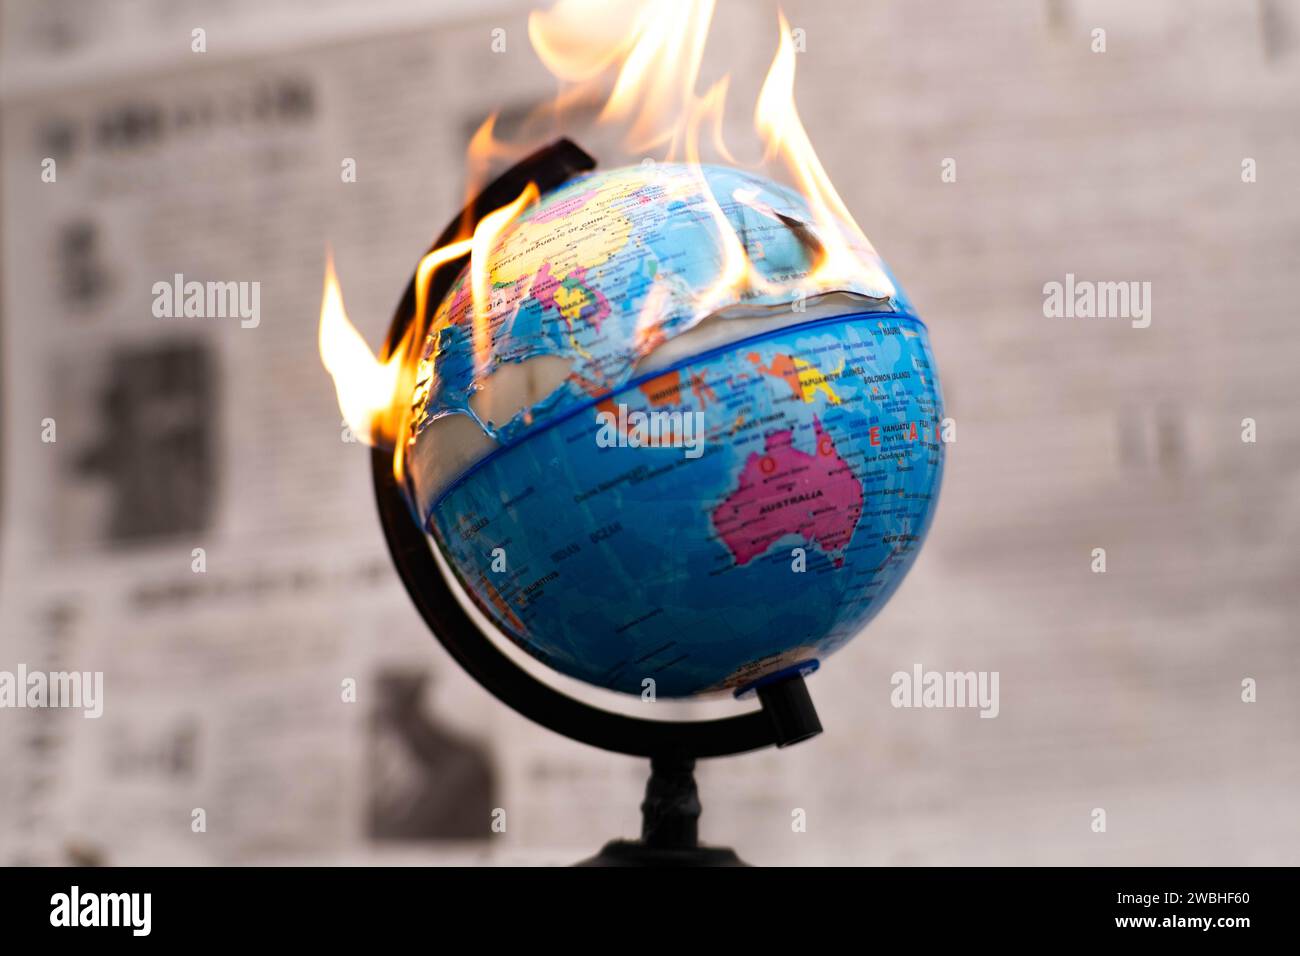 Model globe on fire. Planet Earth Burning. Global Warming and Climate Change Concept. Stock Photo